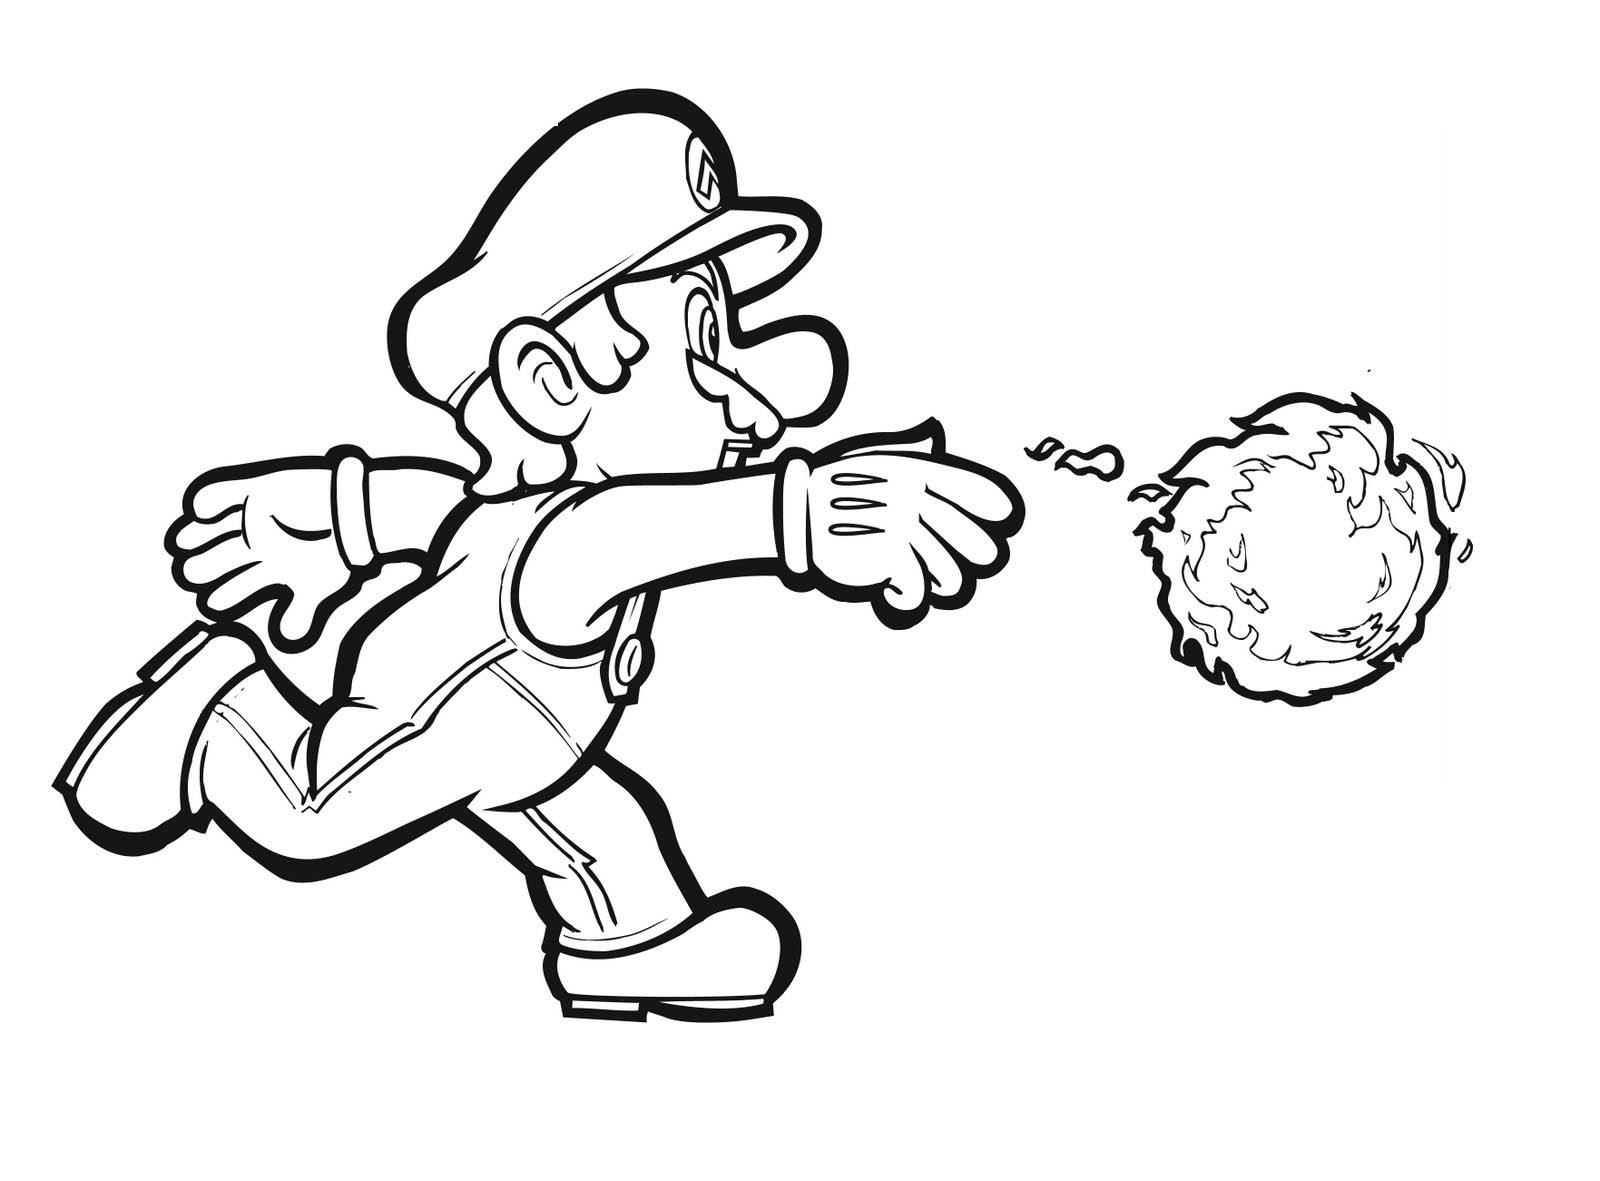 mario-coloring-pages-4